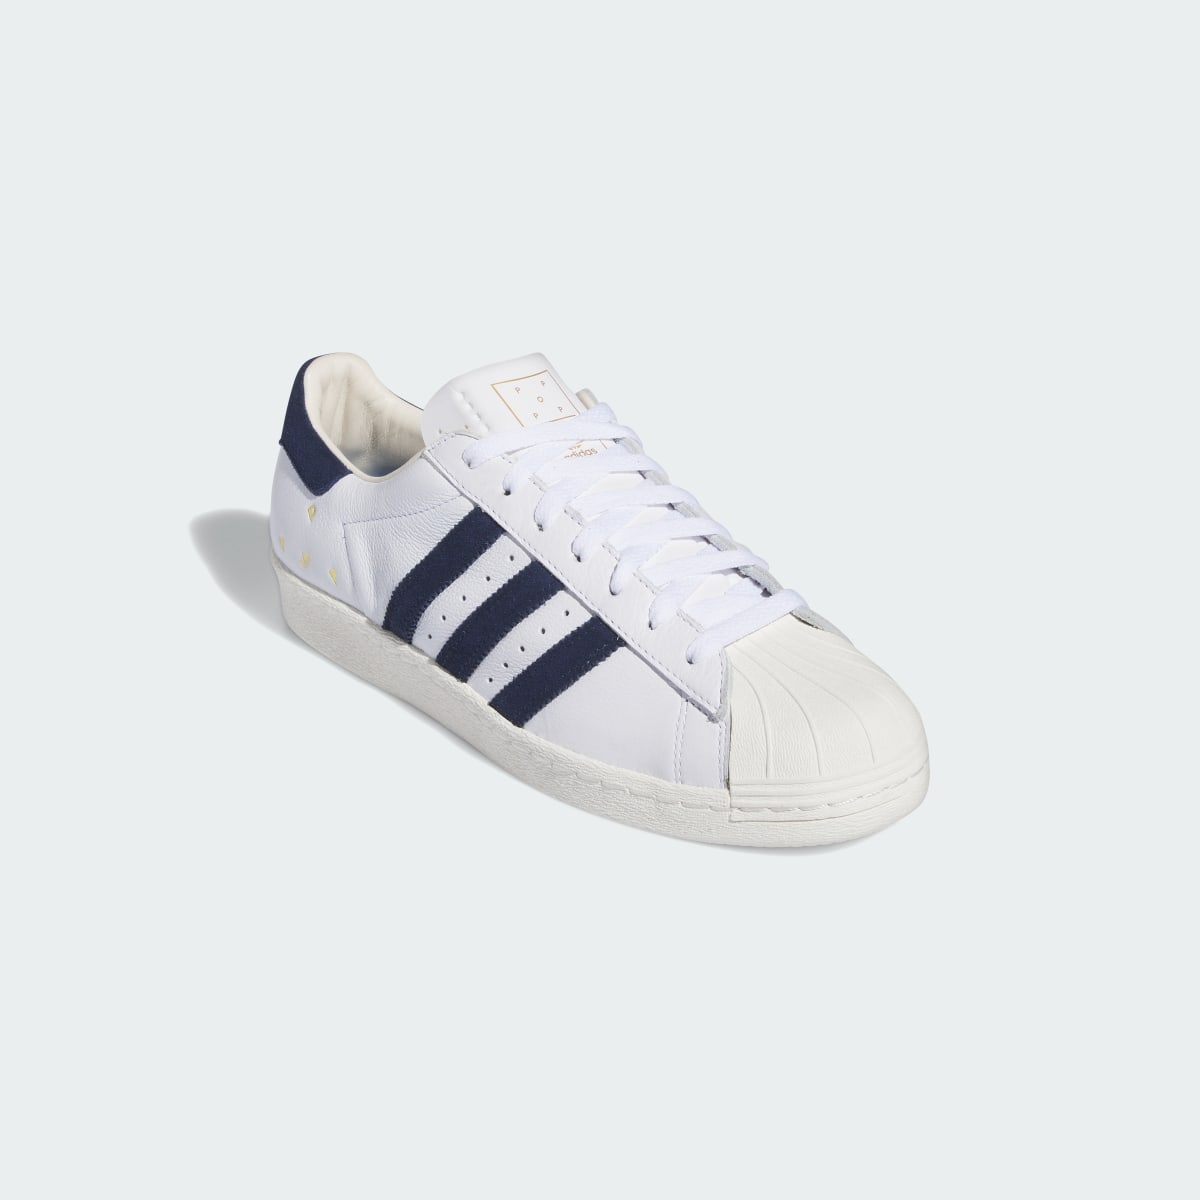 Adidas Pop Trading Co Superstar ADV Trainers. 6